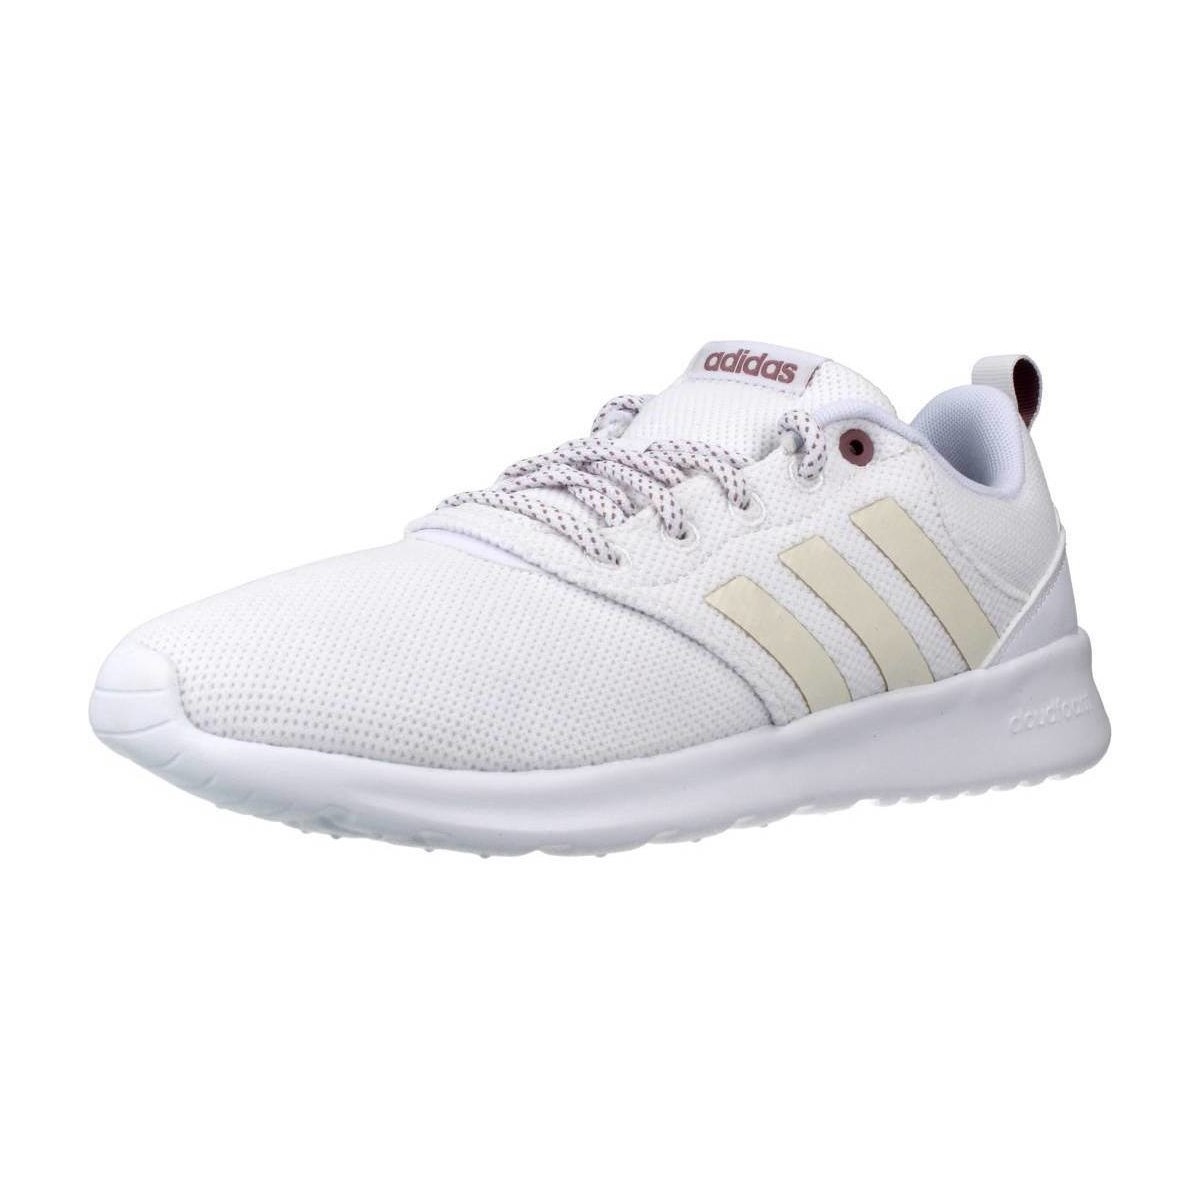 Sneakers adidas QT RACER 2.0